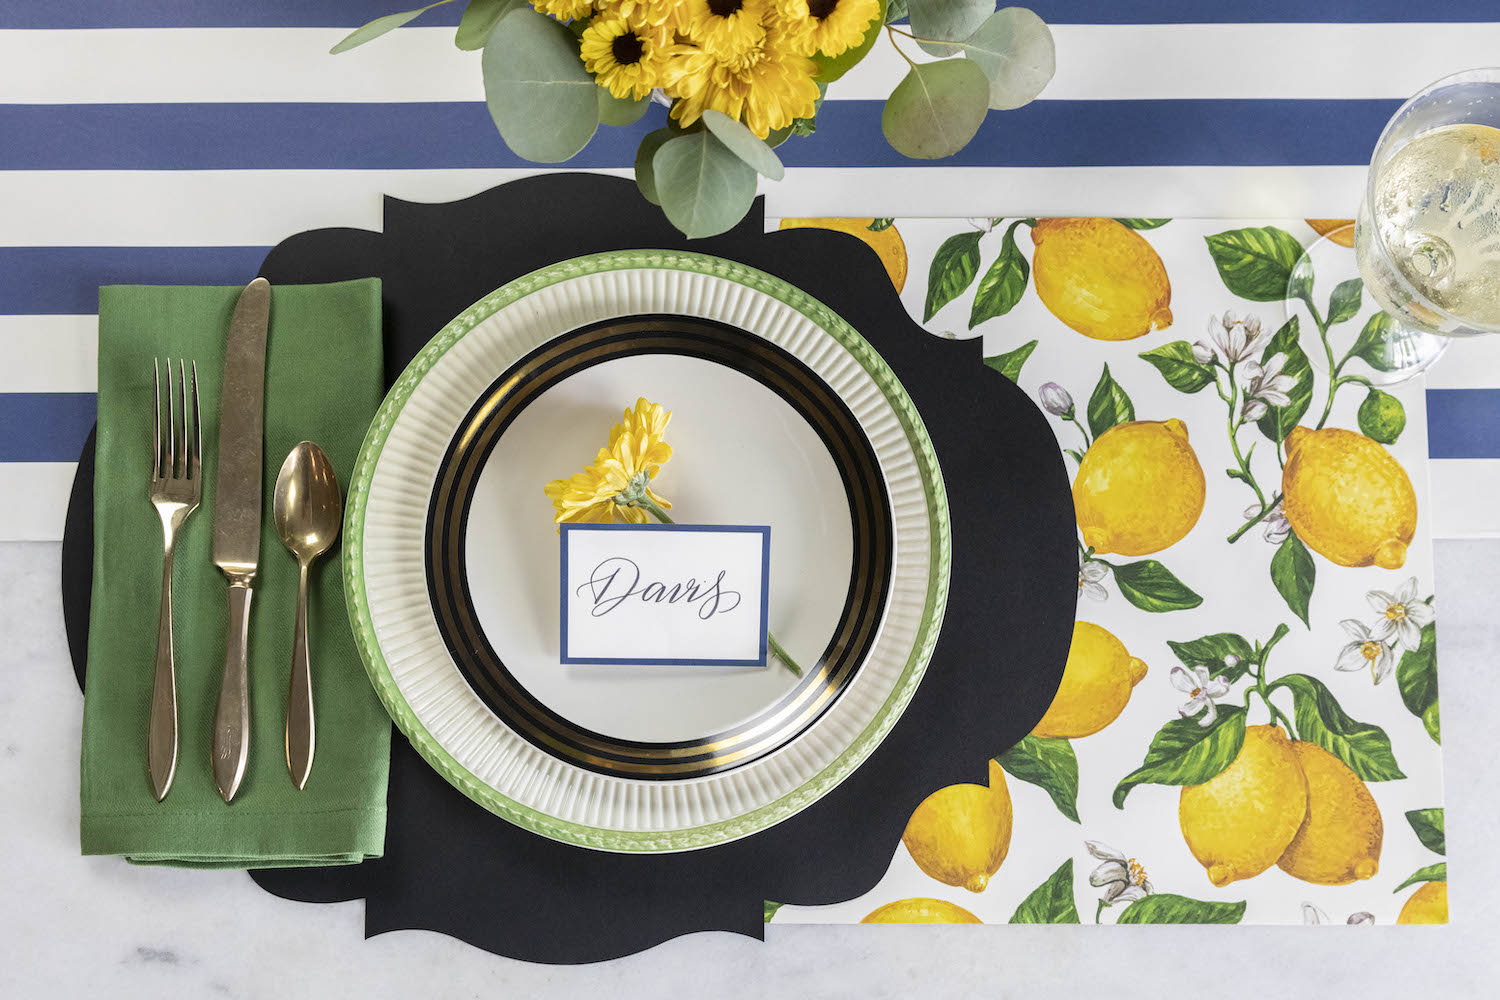 Die-cut Black French Frame Placemat